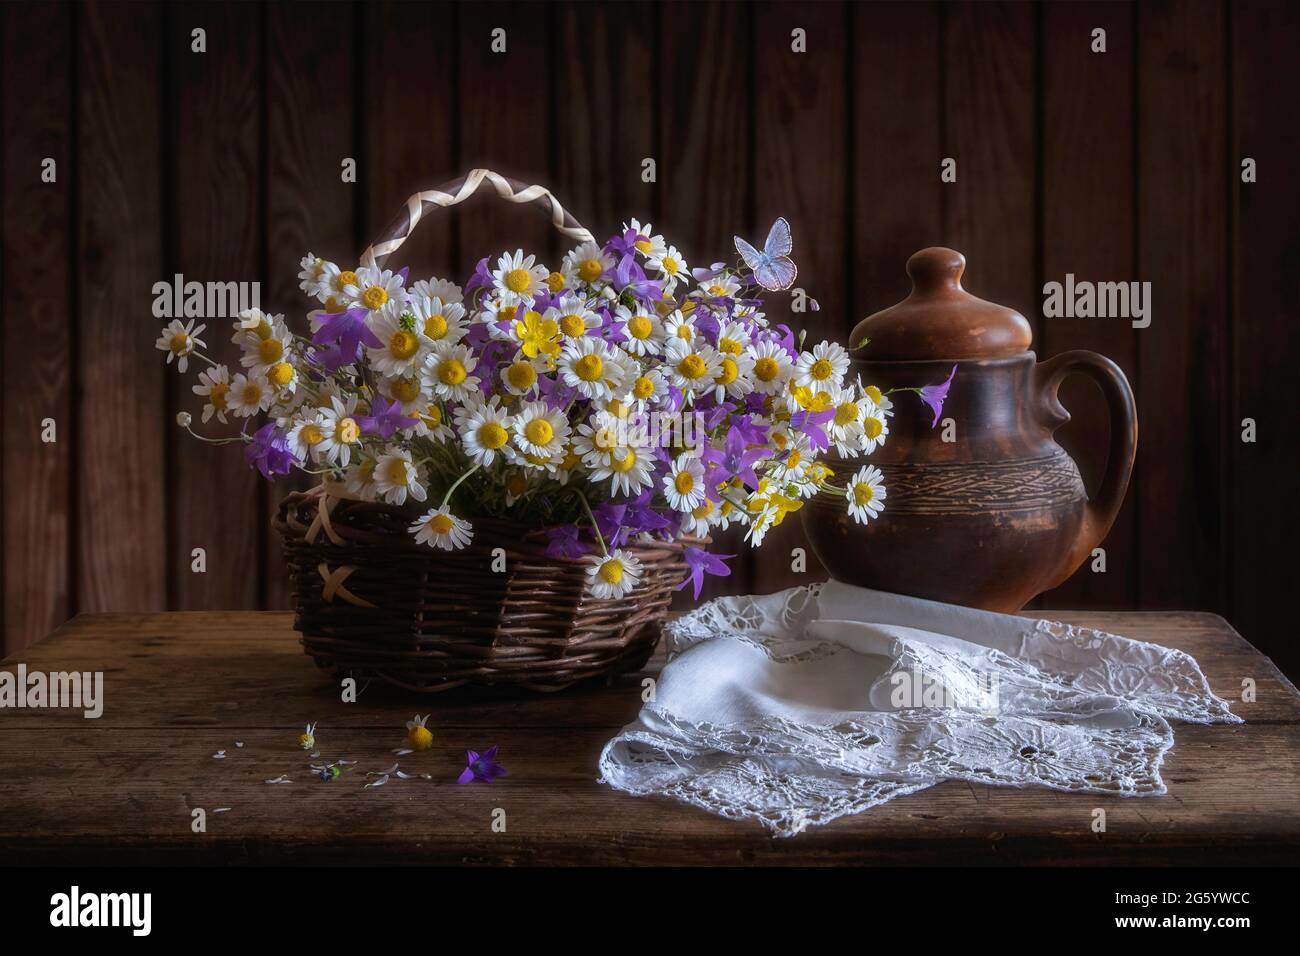 Rural still life with basket of wildflowers Stock Photo